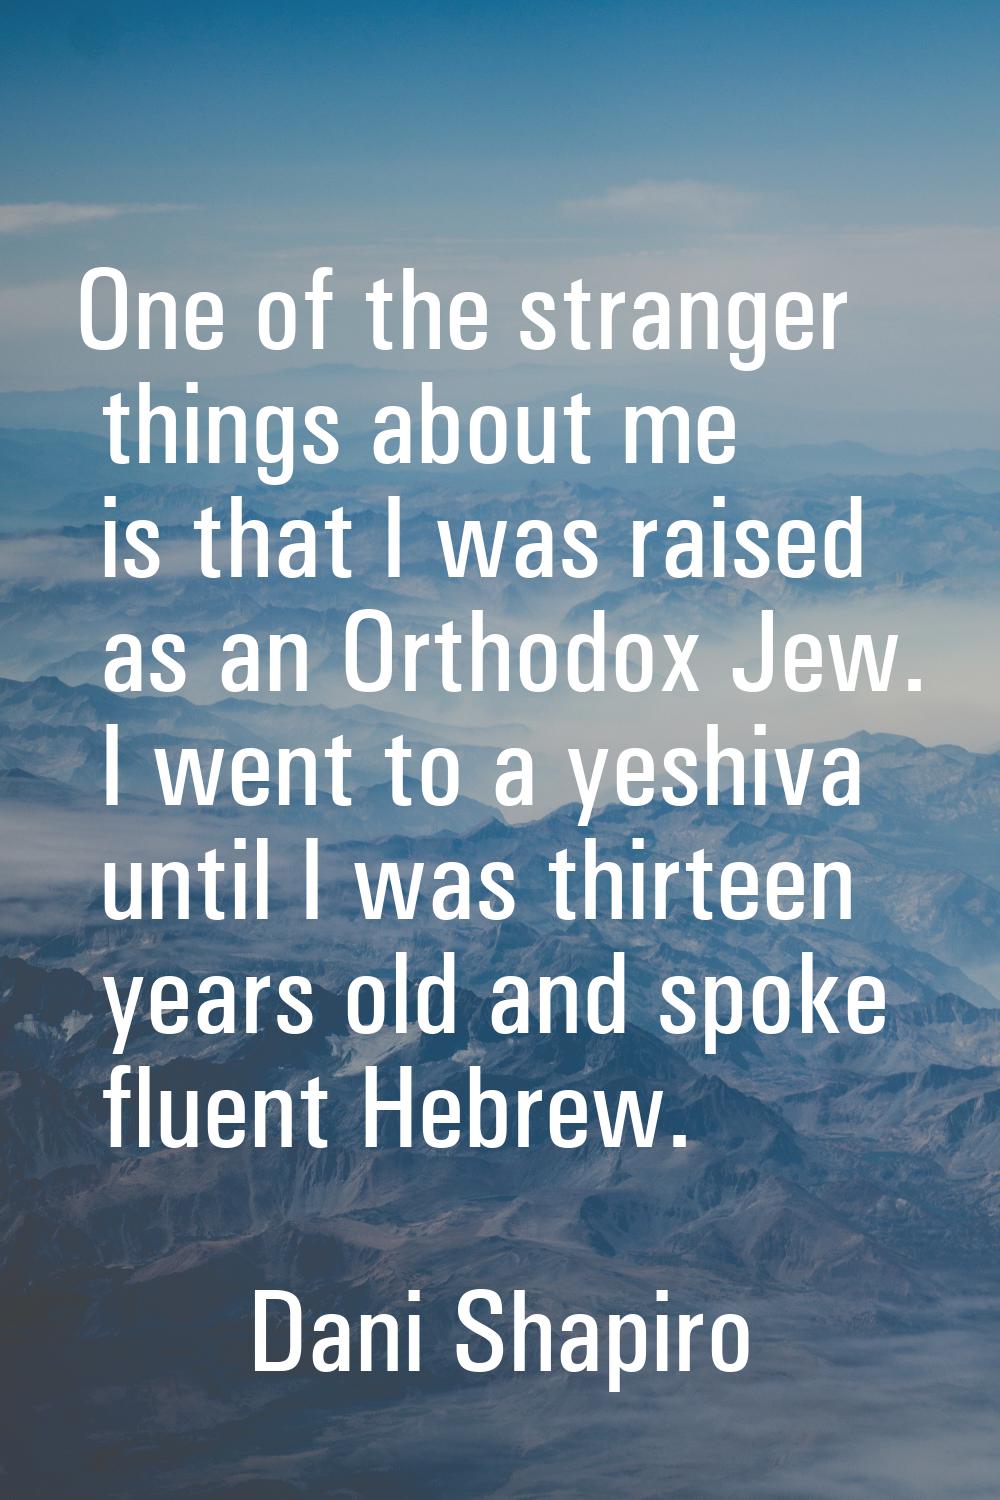 One of the stranger things about me is that I was raised as an Orthodox Jew. I went to a yeshiva un